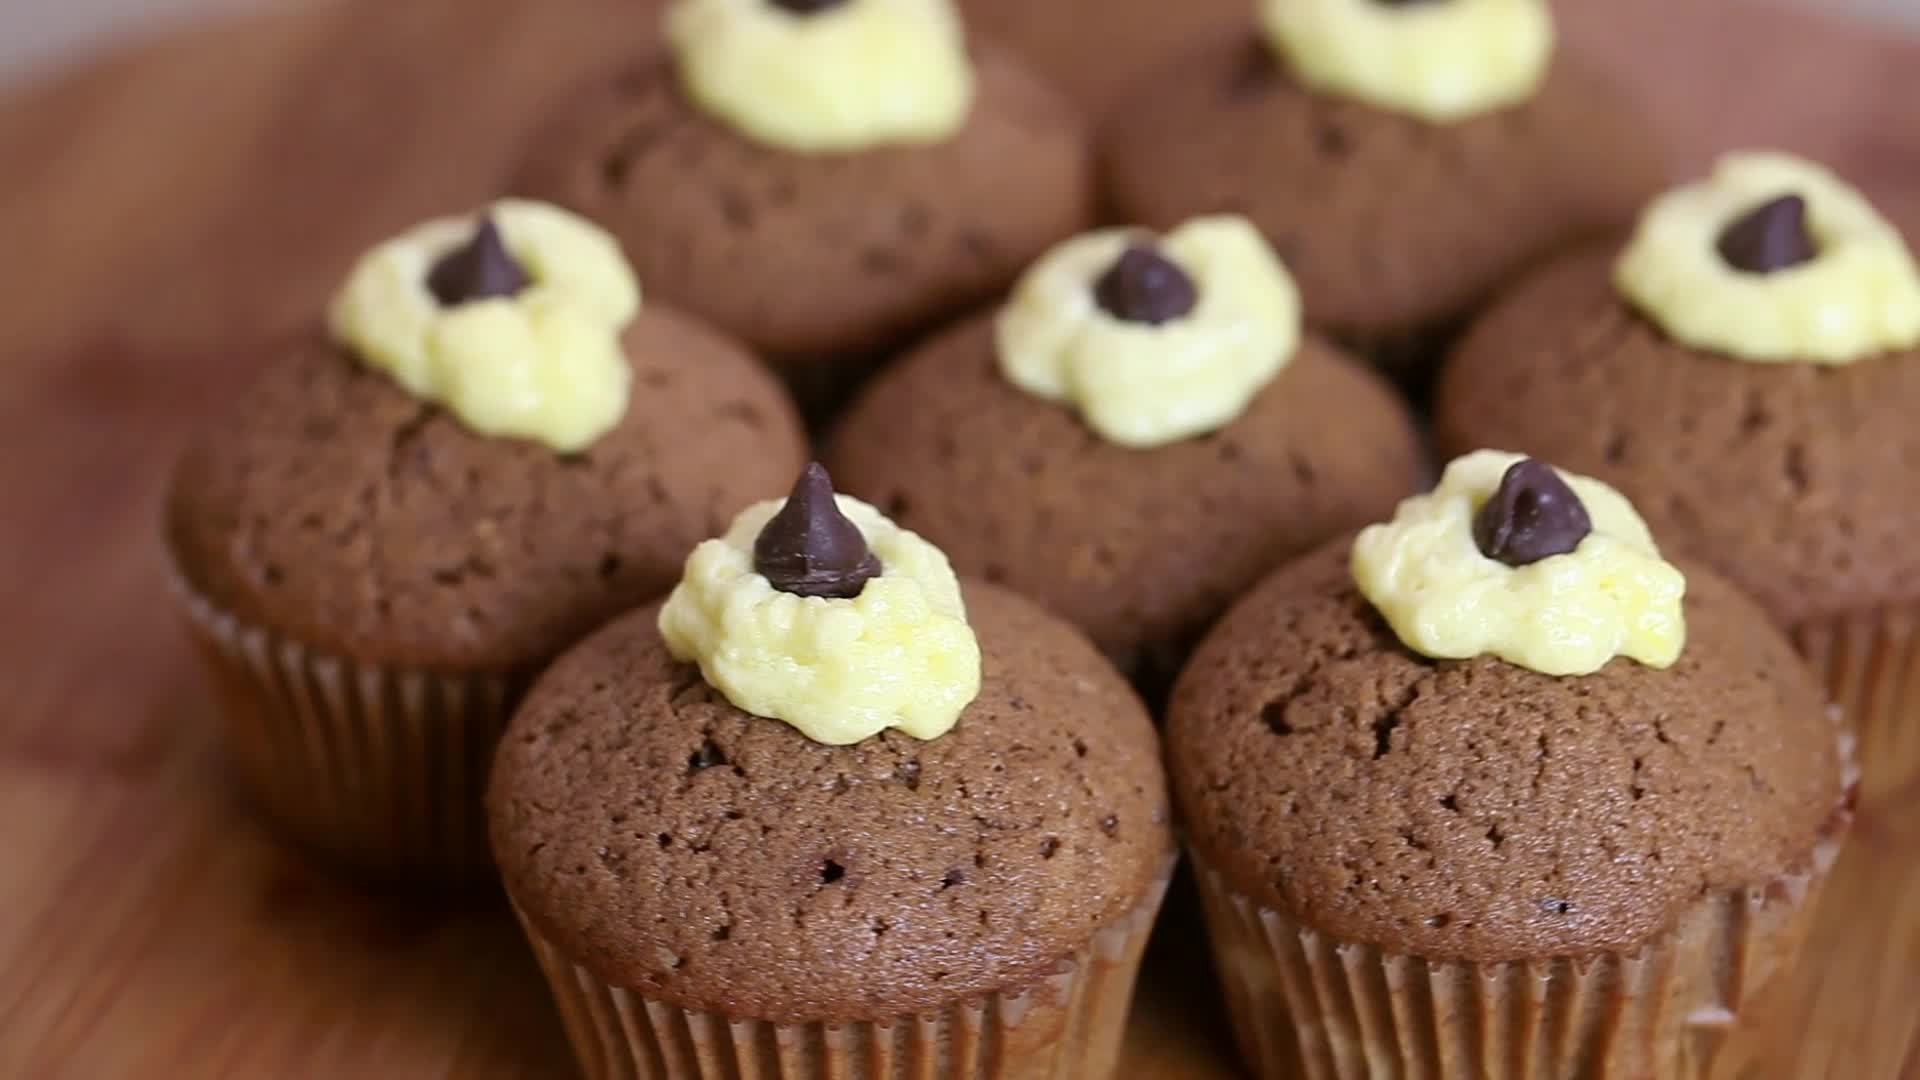 How To Make Chocolate Cupcakes How to Make Chocolate Cupcakes with wikiHow